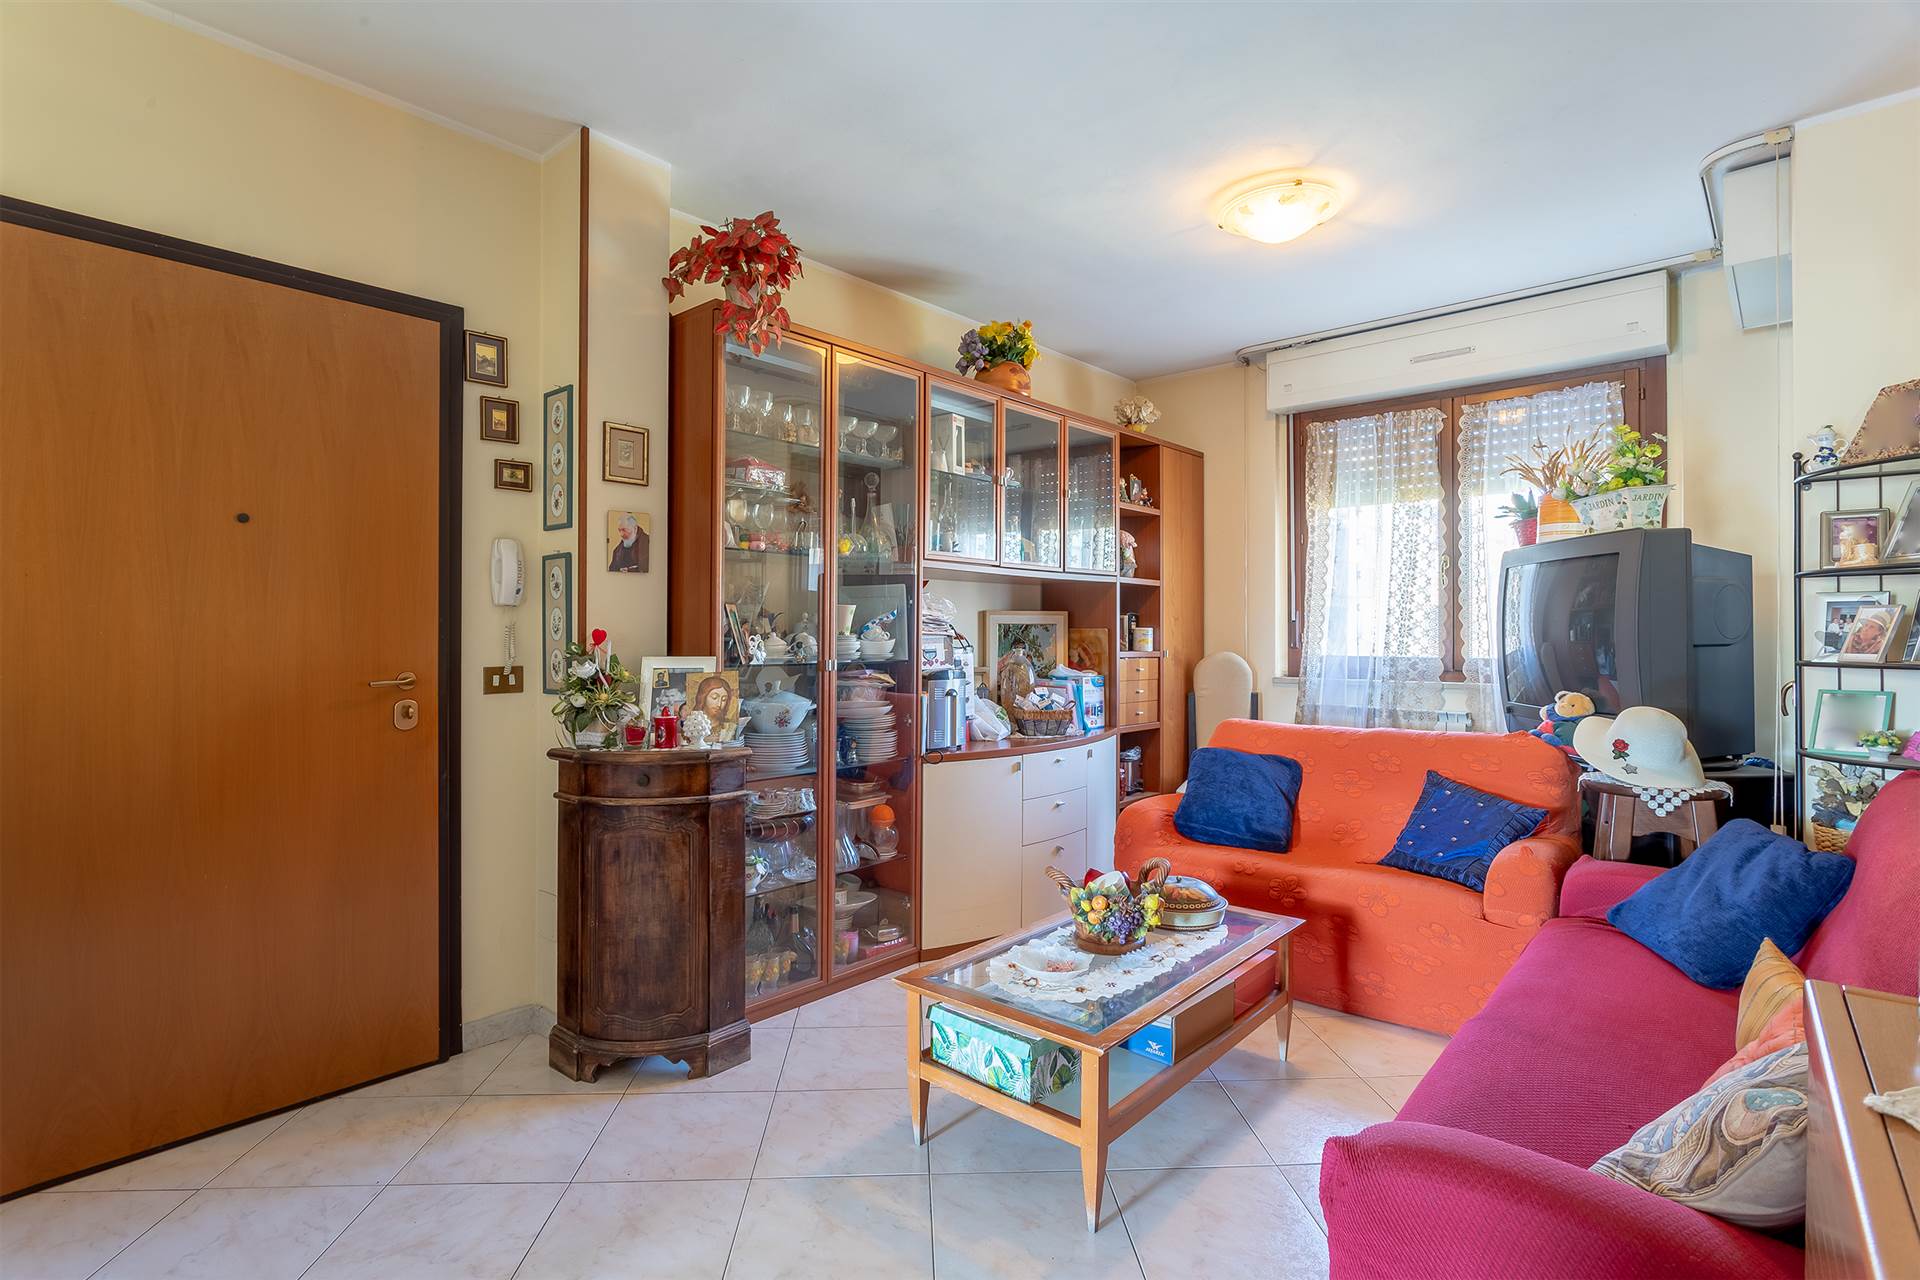 SAN LORENZO, CAMPI BISENZIO, Apartment for sale of 81 Sq. mt., Good condition, Heating Individual heating system, Energetic class: G, placed at 4° on 6, composed by: 4 Rooms, Separate kitchen, , 2 